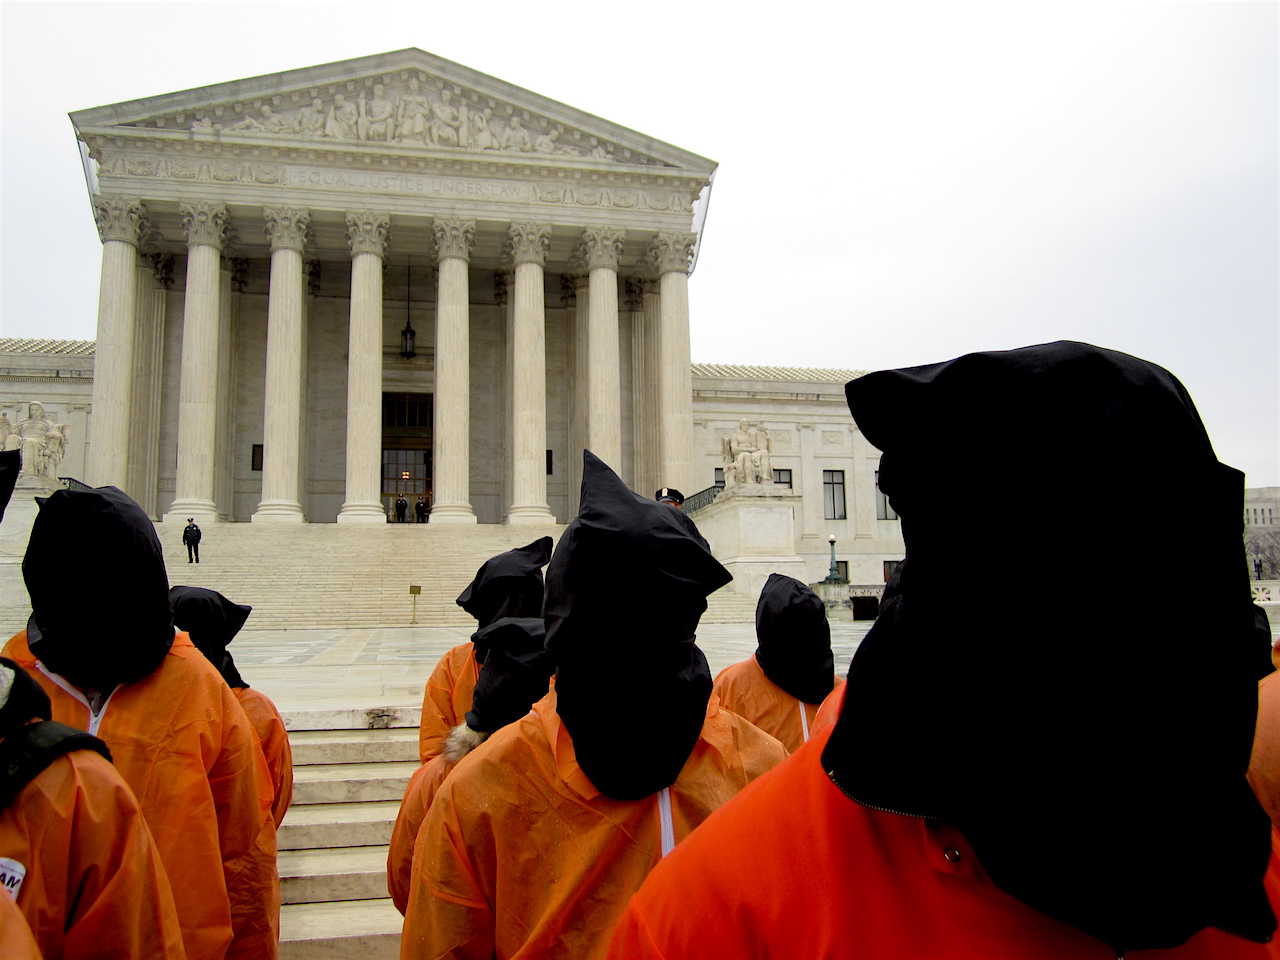 Protestors against rh existence of Guantanamo outside the US Supreme Court on January 11, 2012, the 10th anniversary of the opening of the prison (Photo: Andy Worthington).